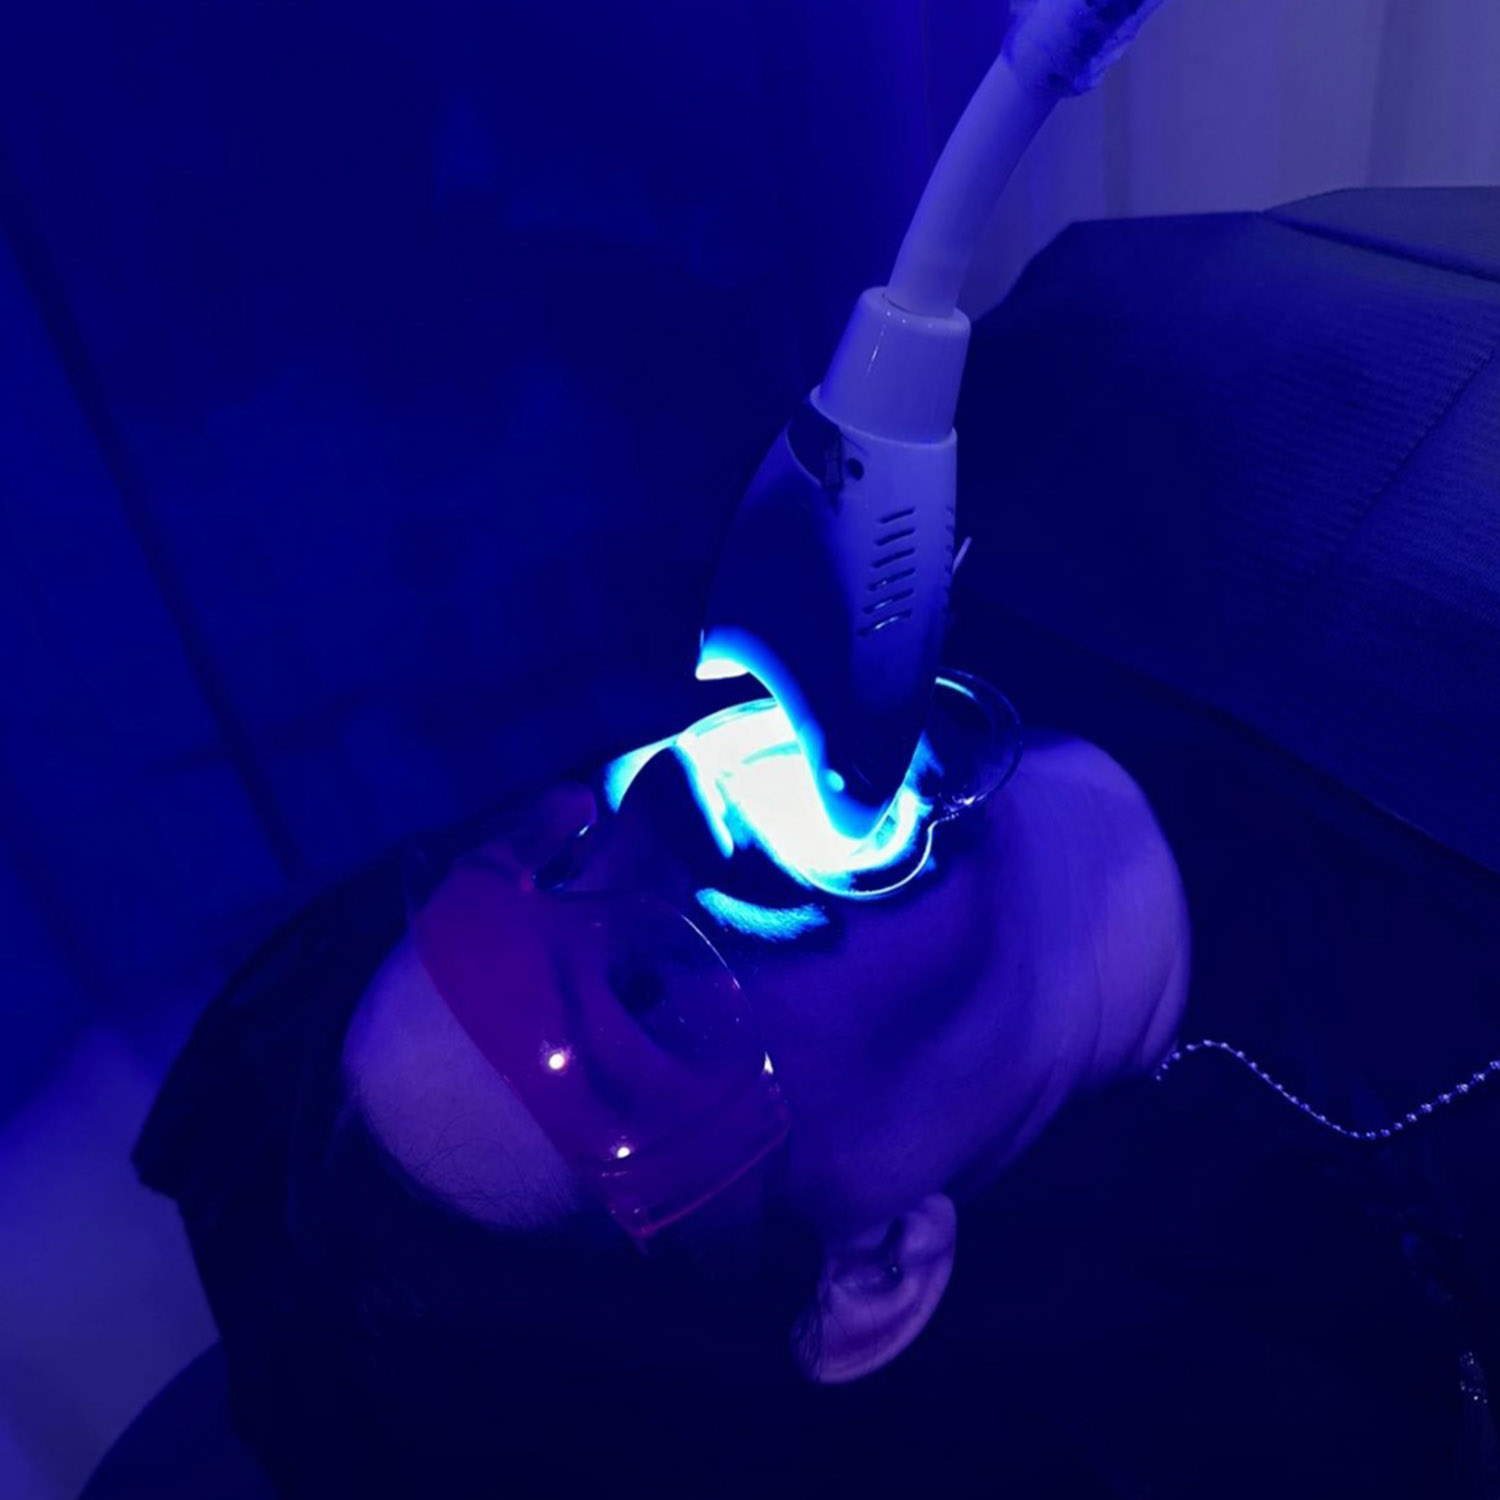 Teeth Whitening Treatment using modern equipment and technique at Rejuvenate Laser & Skin Clinic